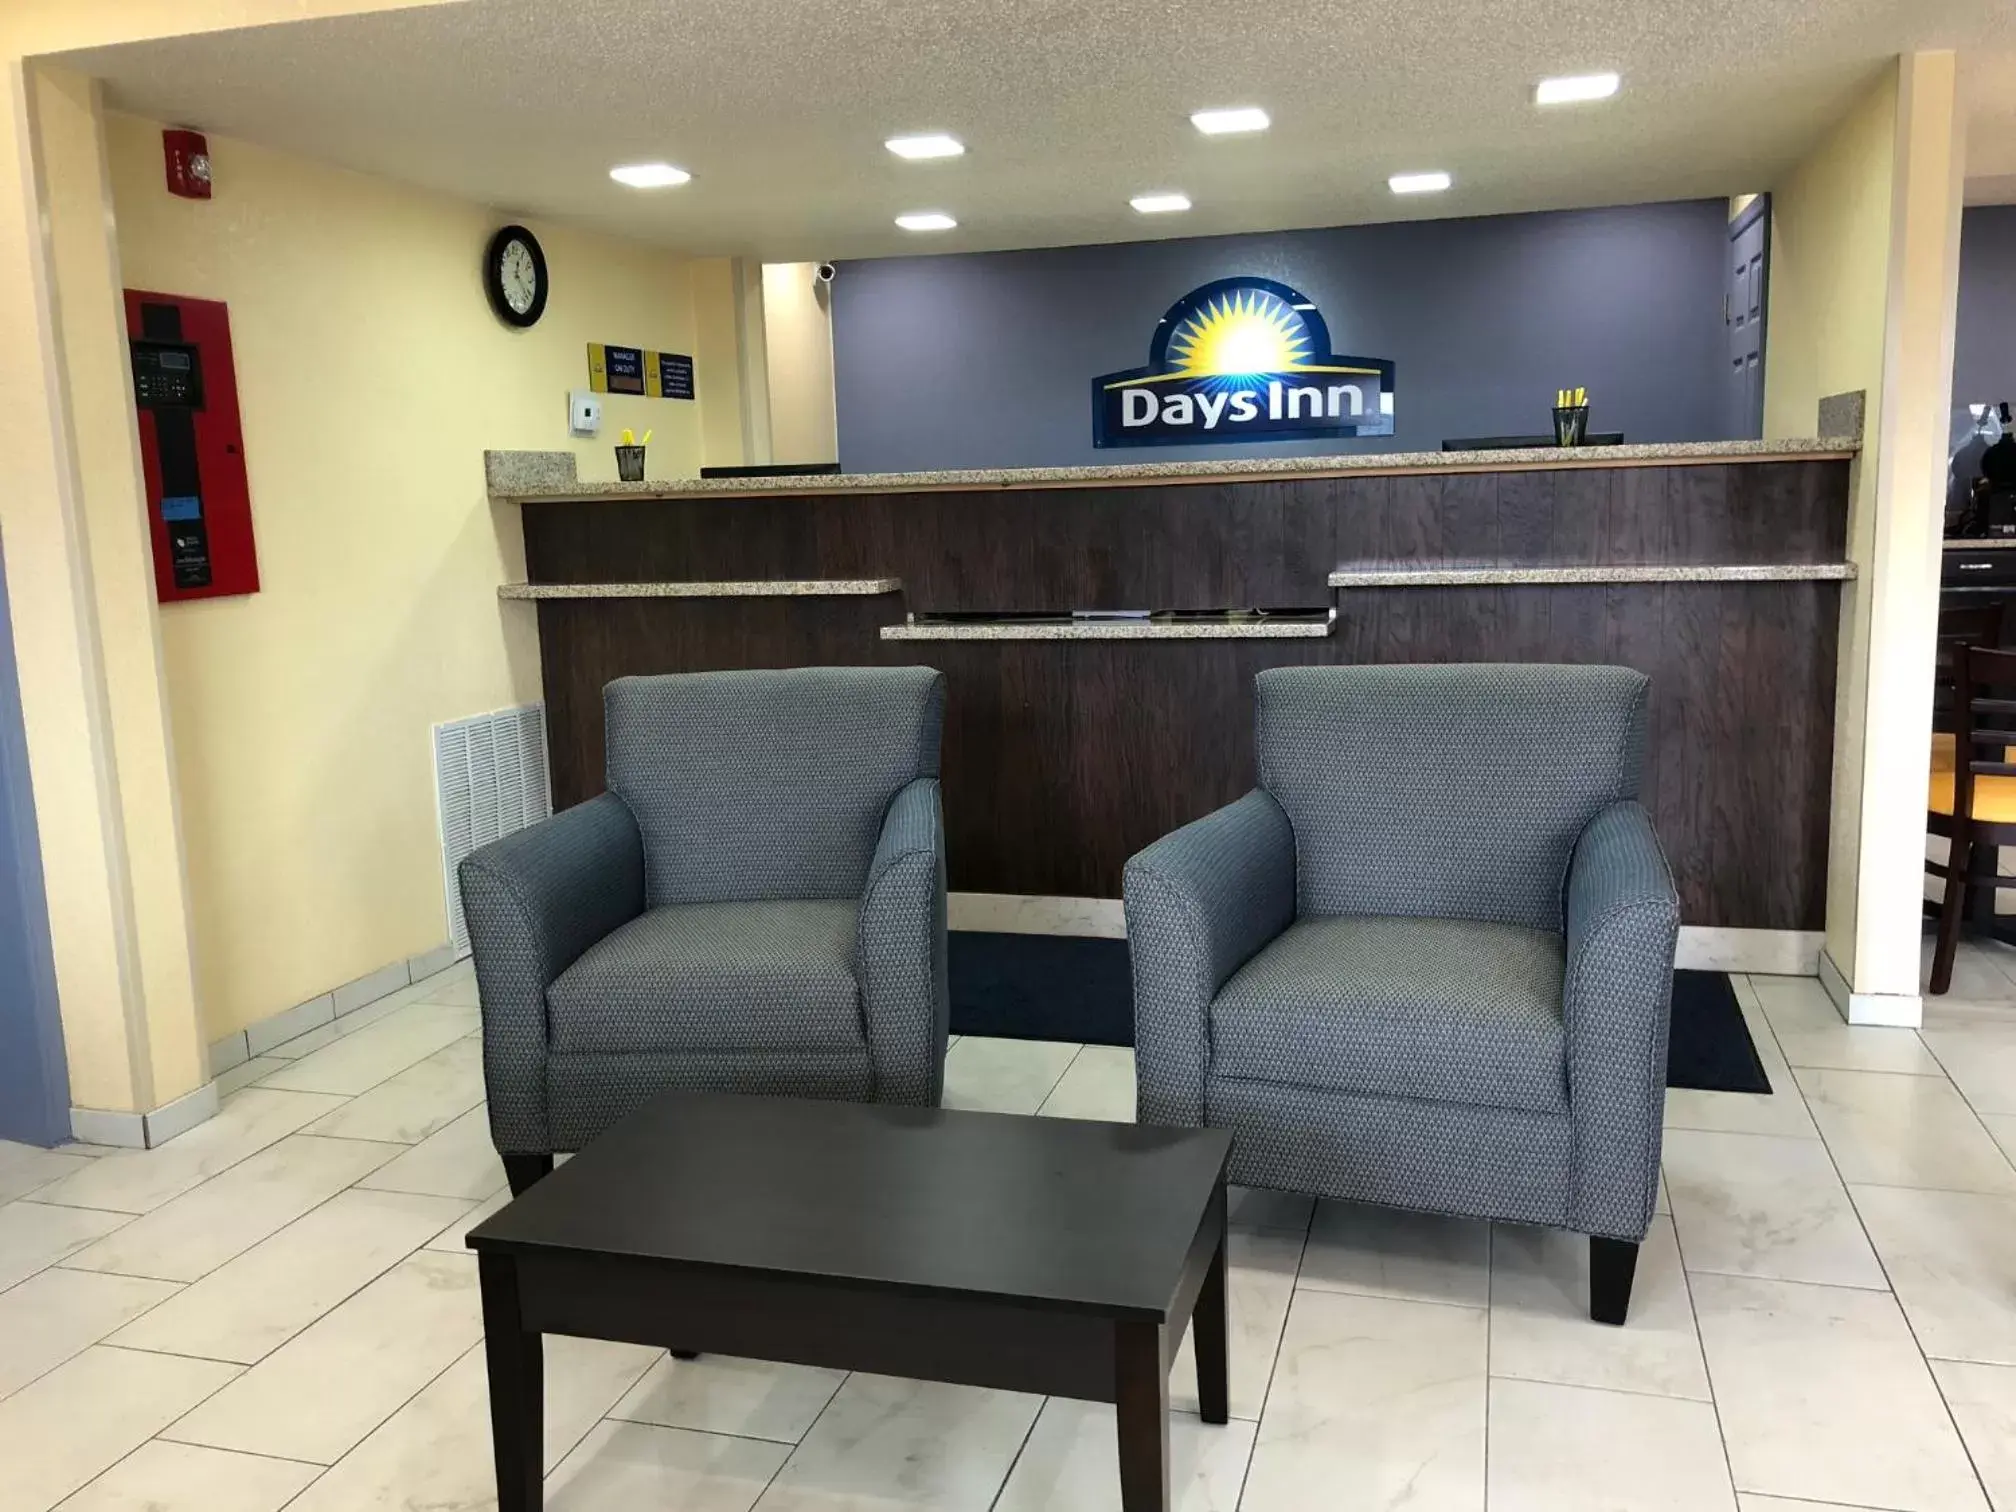 Seating area, Lobby/Reception in Days Inn by Wyndham Charles Town